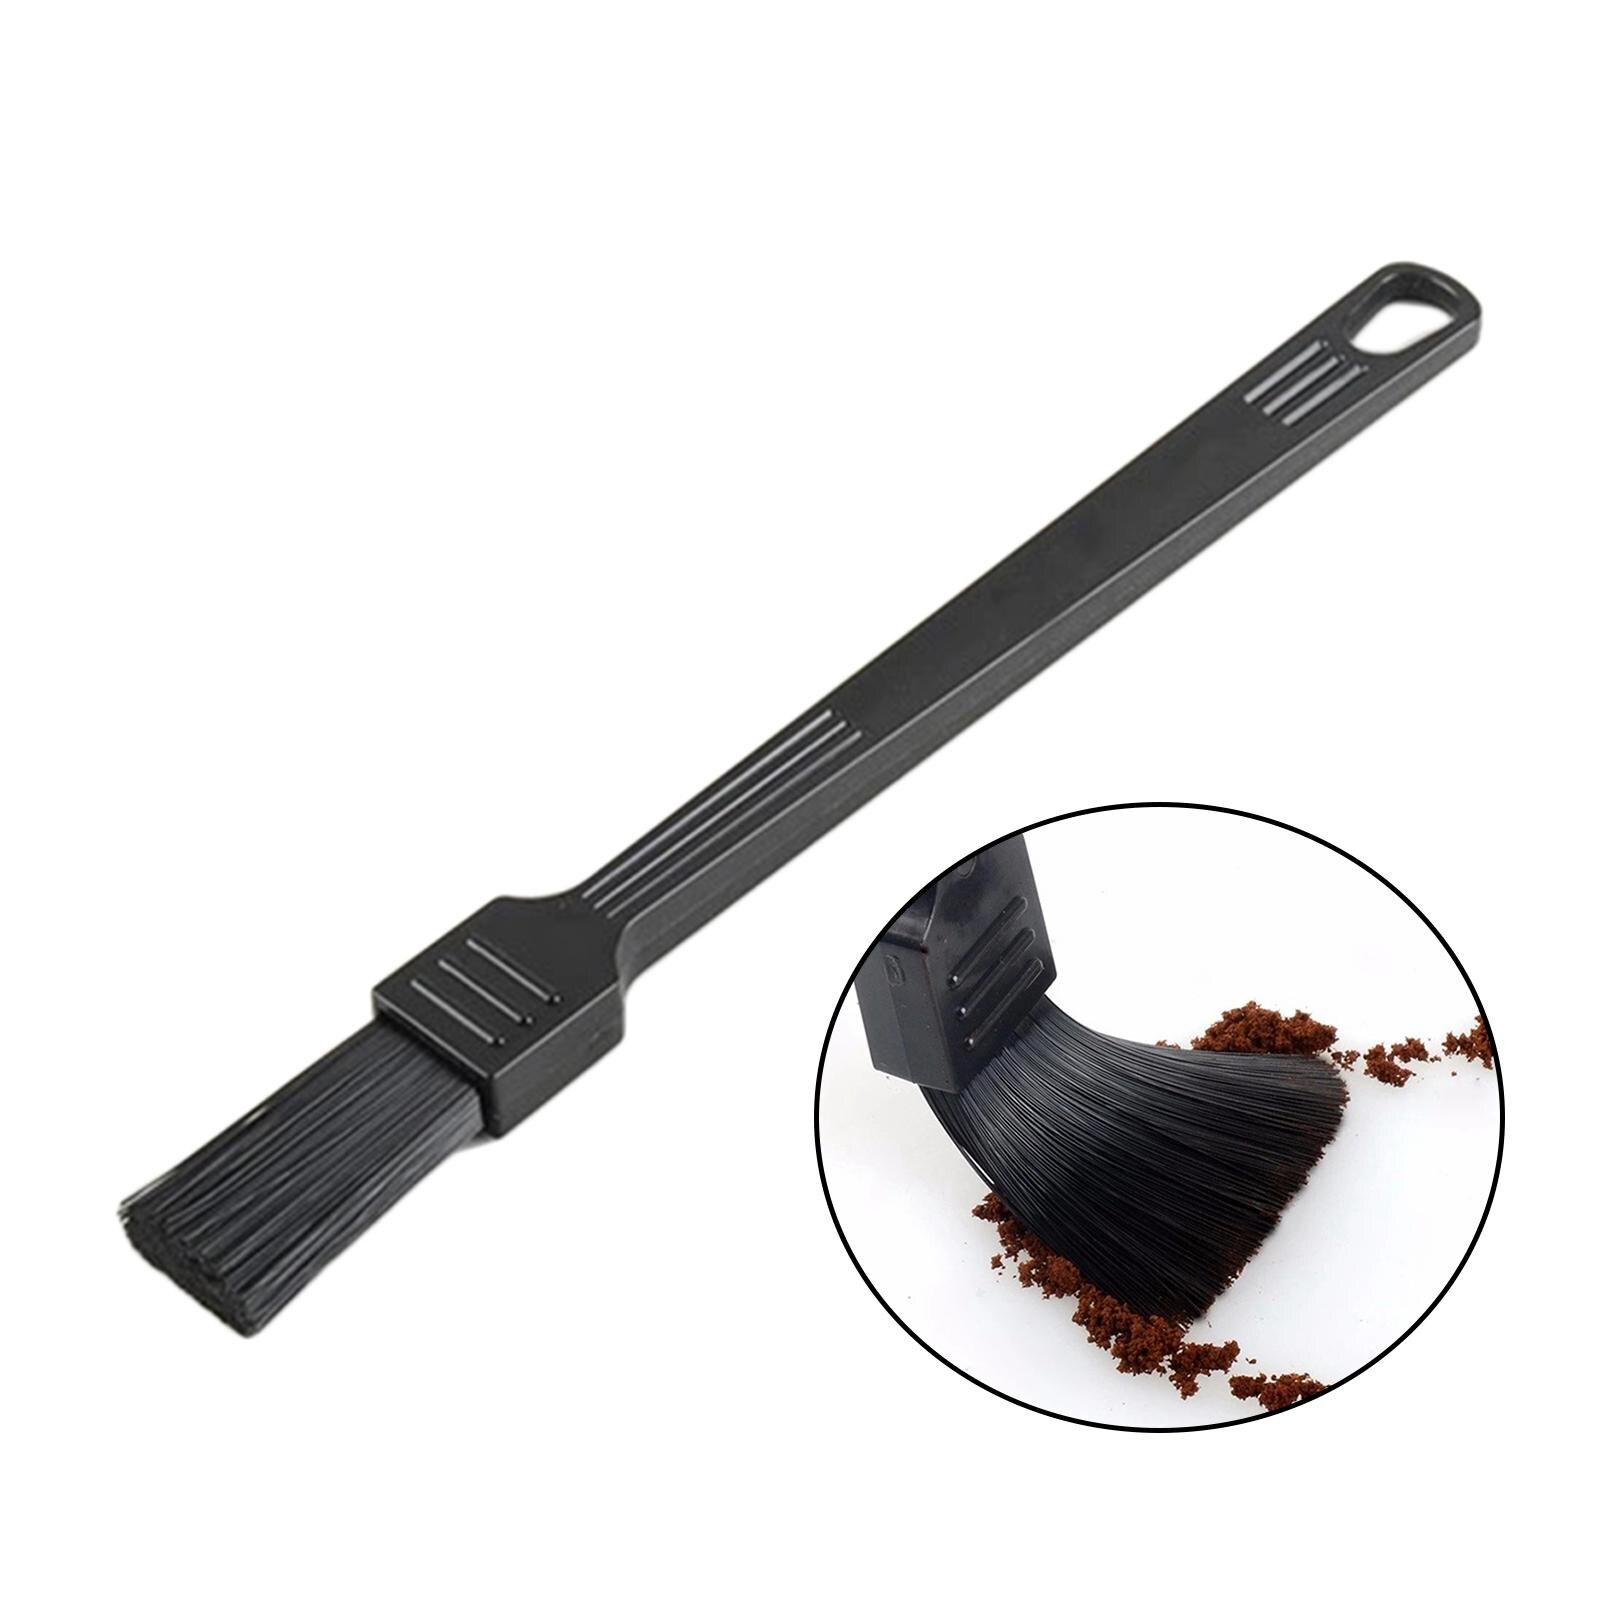 Coffee Cleaning Brush Espresso Brush Accessories Sturdy for Coffee Grinder Fitting Coffee Brush Tool Dusting Espresso Brush